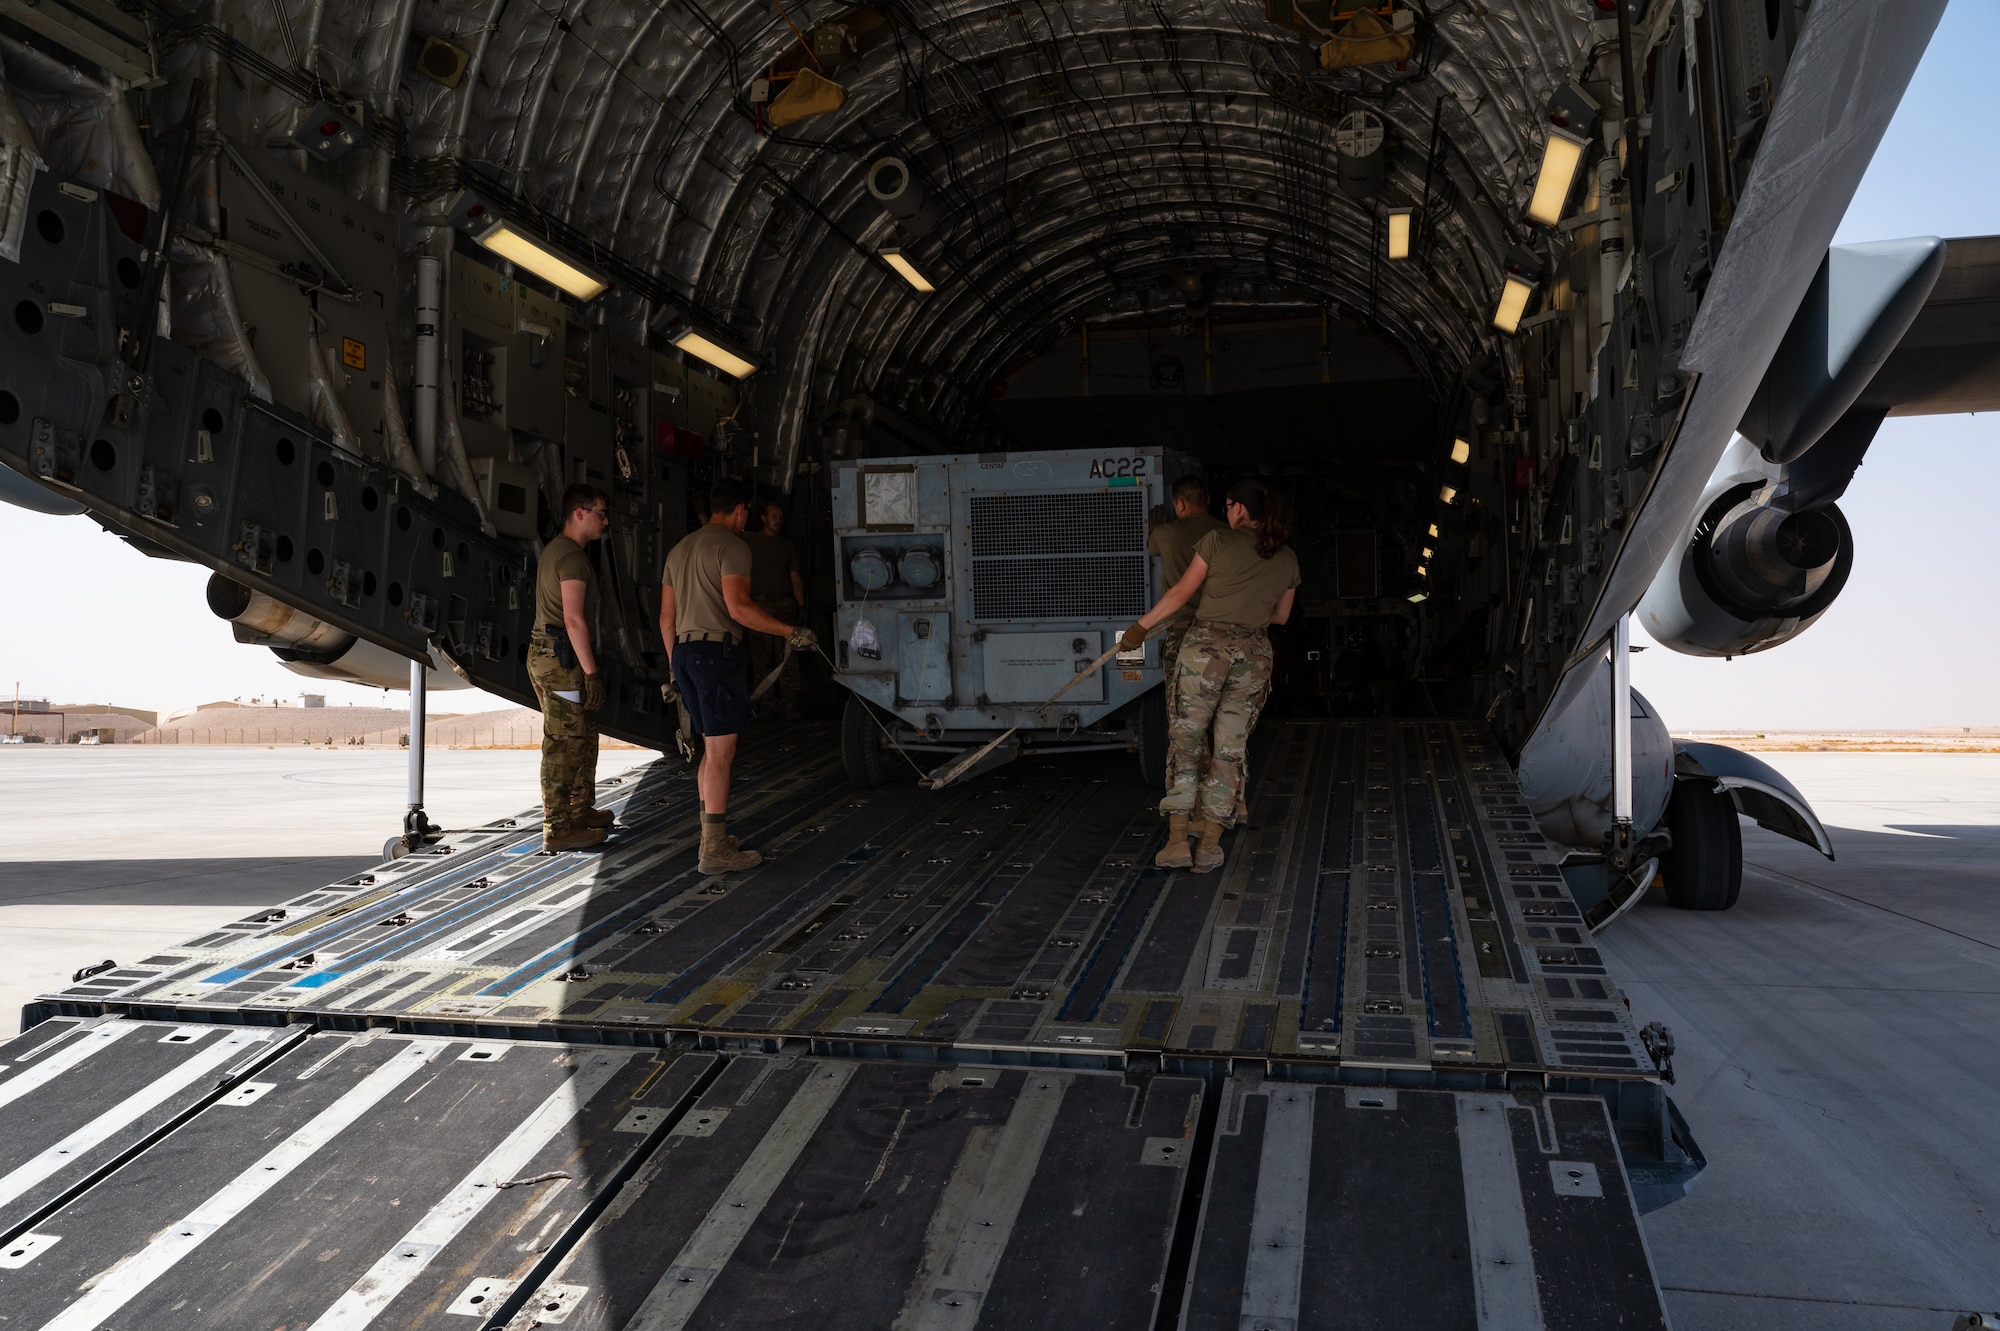 U.S. Air Force Airmen from the 379th Air Expeditionary Wing load a mobile air conditioning unit for a departure flight onto a U.S. Air Force C-17 Globemaster during exercise Accurate Test 22 at Thumrait Air Base, Oman, May 22, 2022.  Loading aircraft is performed systematically, using a computer program to optimize space and weight distribution for each flight and its passengers. (U.S. Air Force photo by Staff Sgt. Dana Tourtellotte)